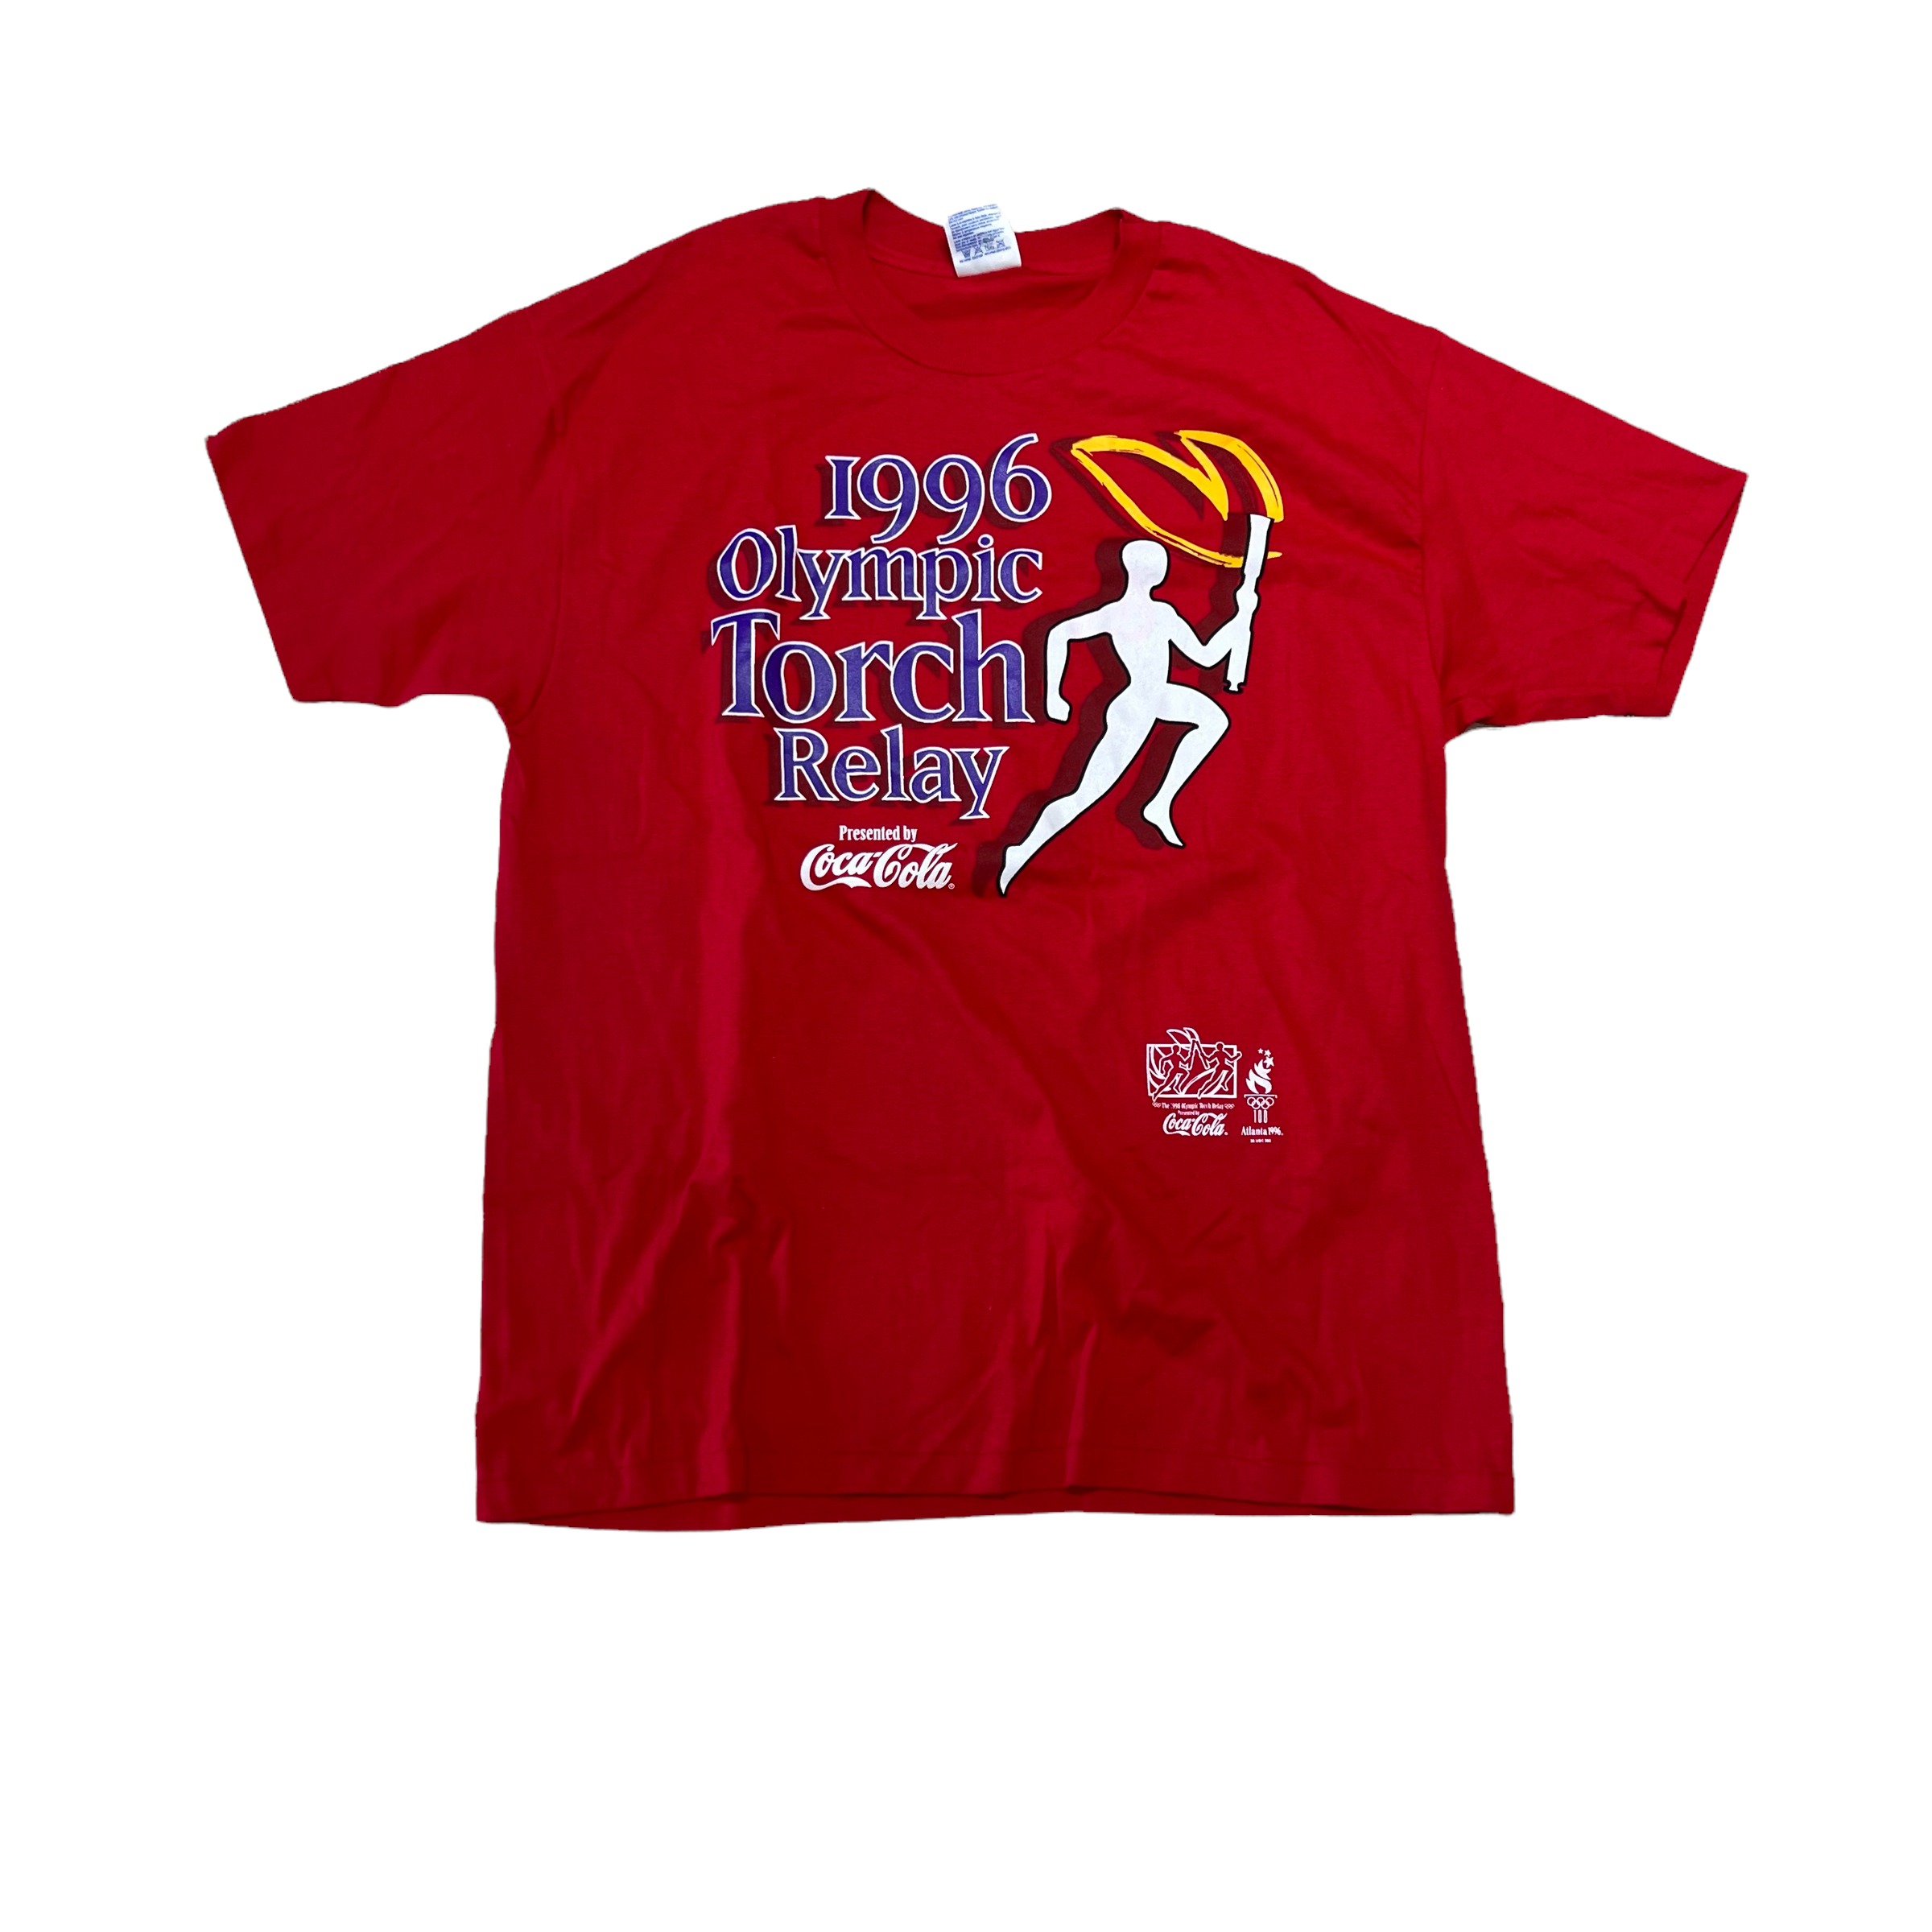 1996 OLYMPIC TORCH RELAY TEE